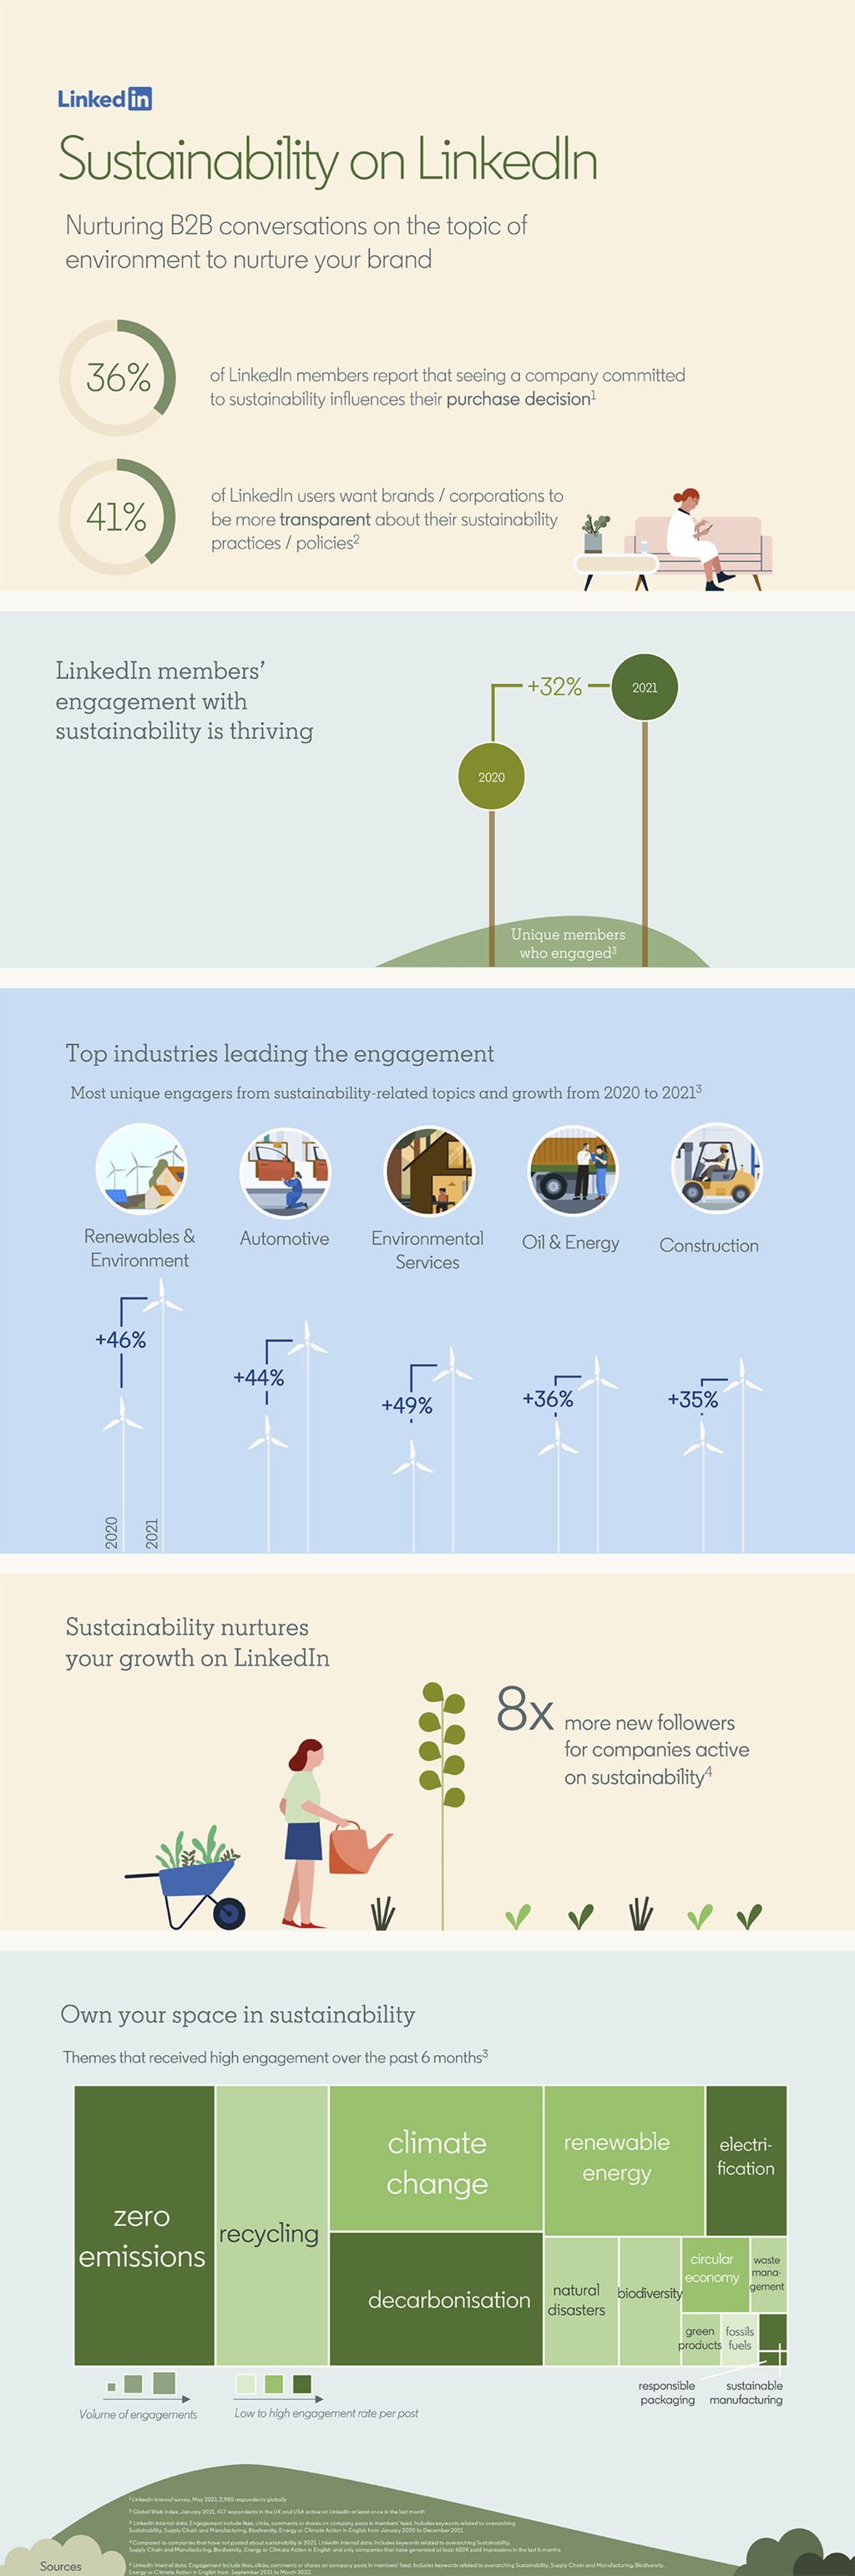 snapshot of a dataviz showcasing numbers related to the sustainability conversation on LinkedIn